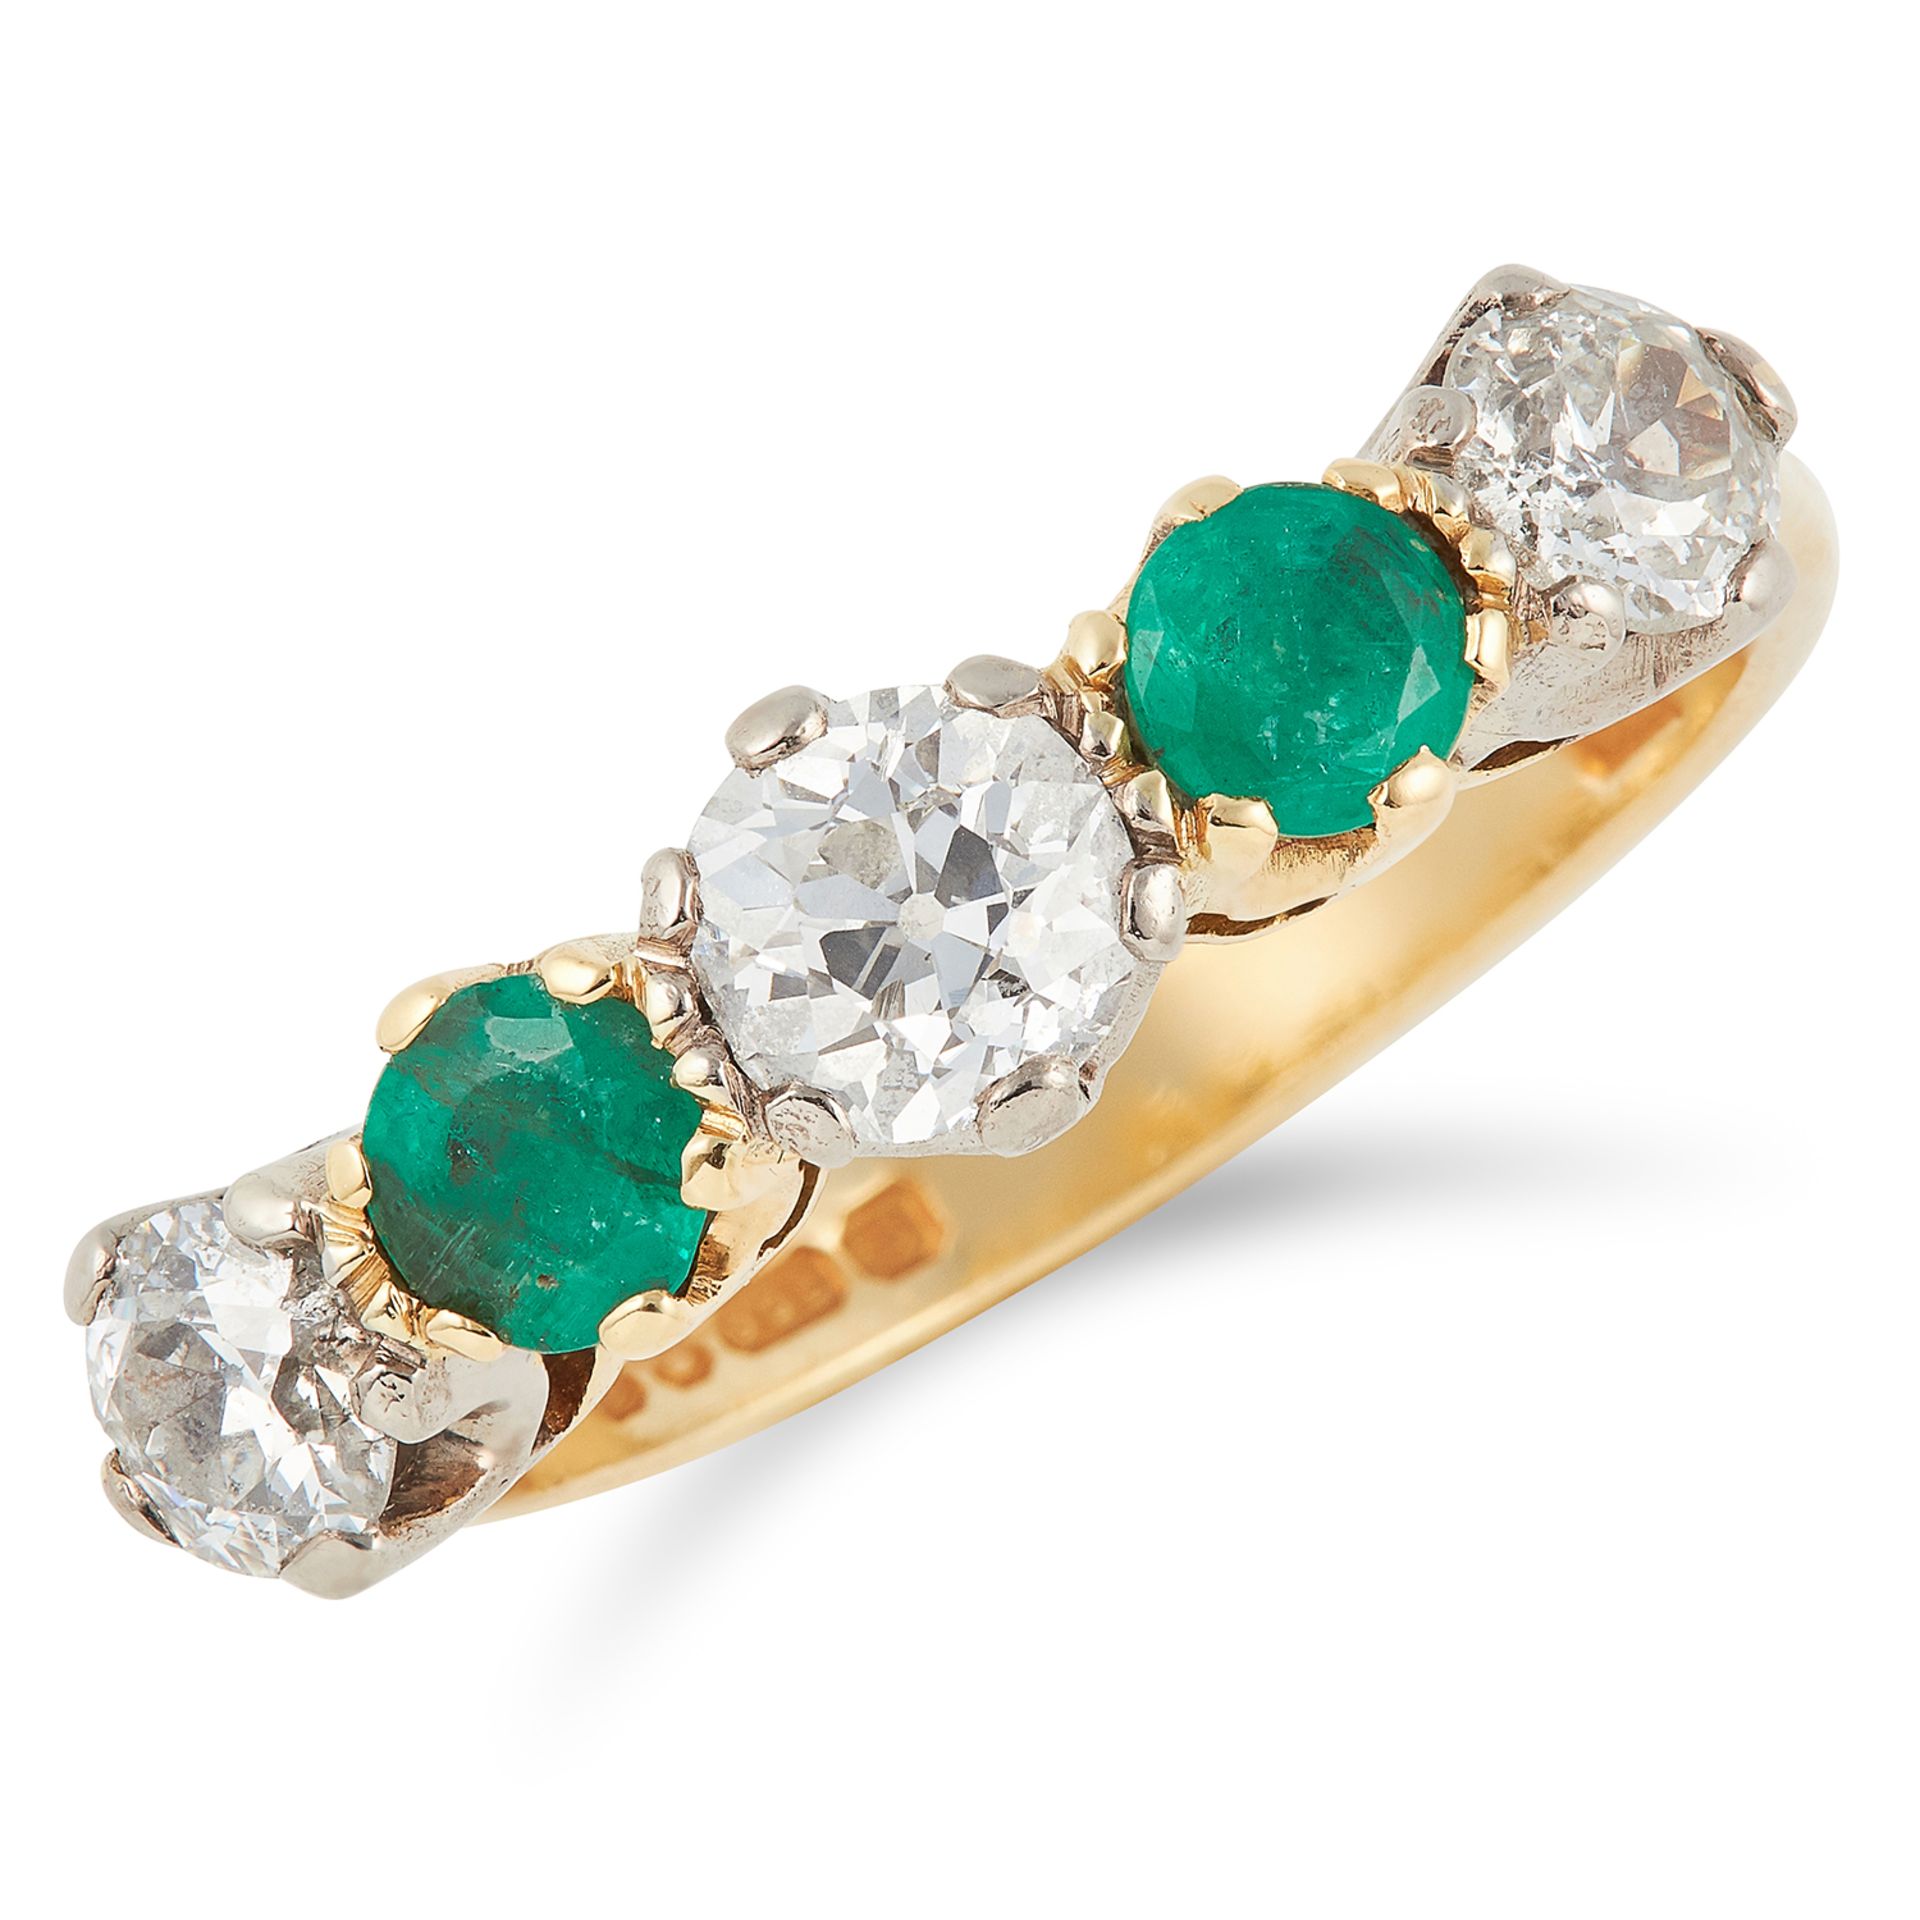 DIAMOND AND EMERALD FIVE STONE RING set with round cut diamonds and round cut emeralds, size N /